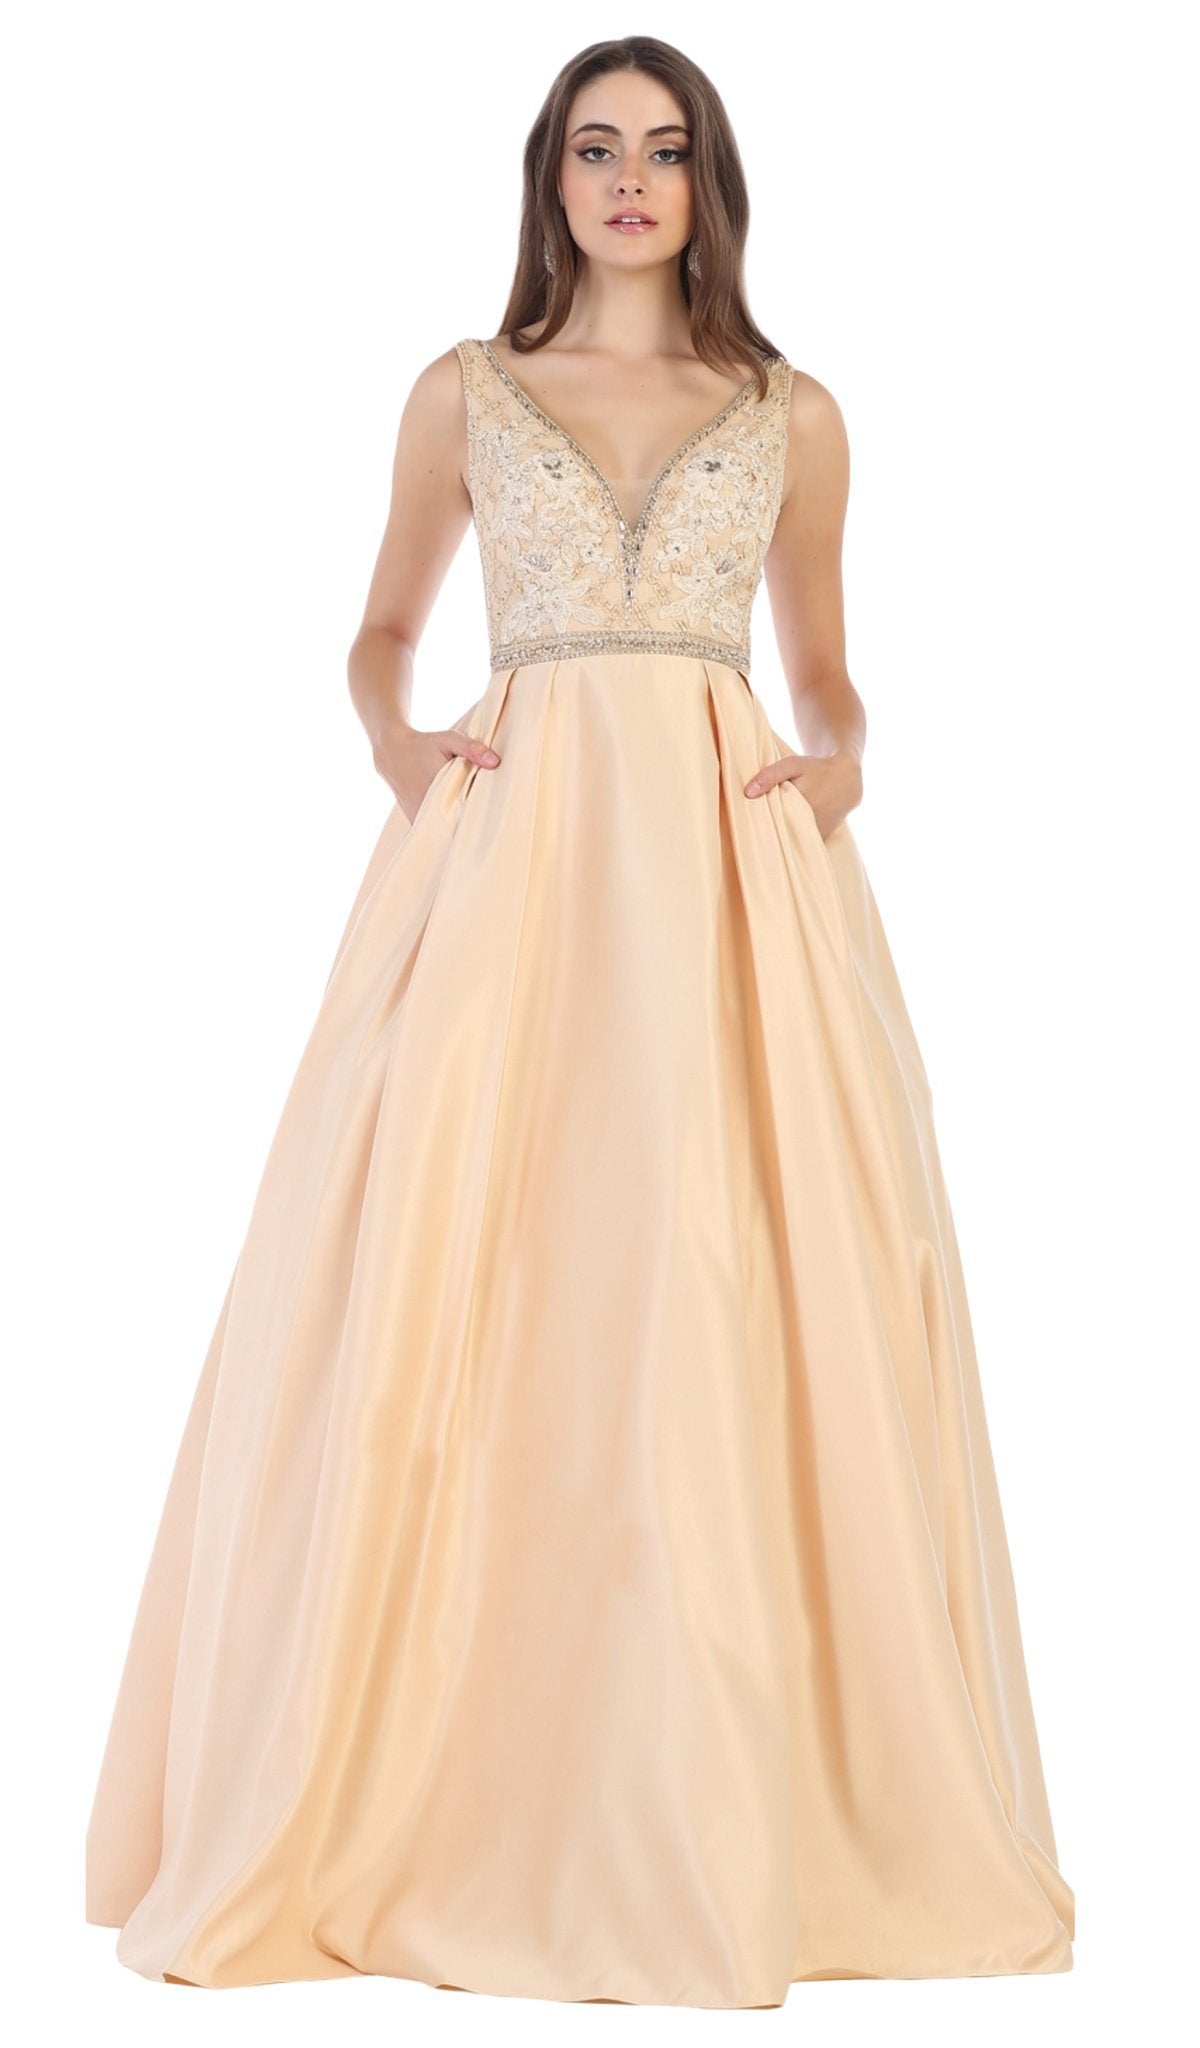 May Queen - MQ1581 Beaded Embroidered Plunging Ballgown Special Occasion Dress 4 / Champagne